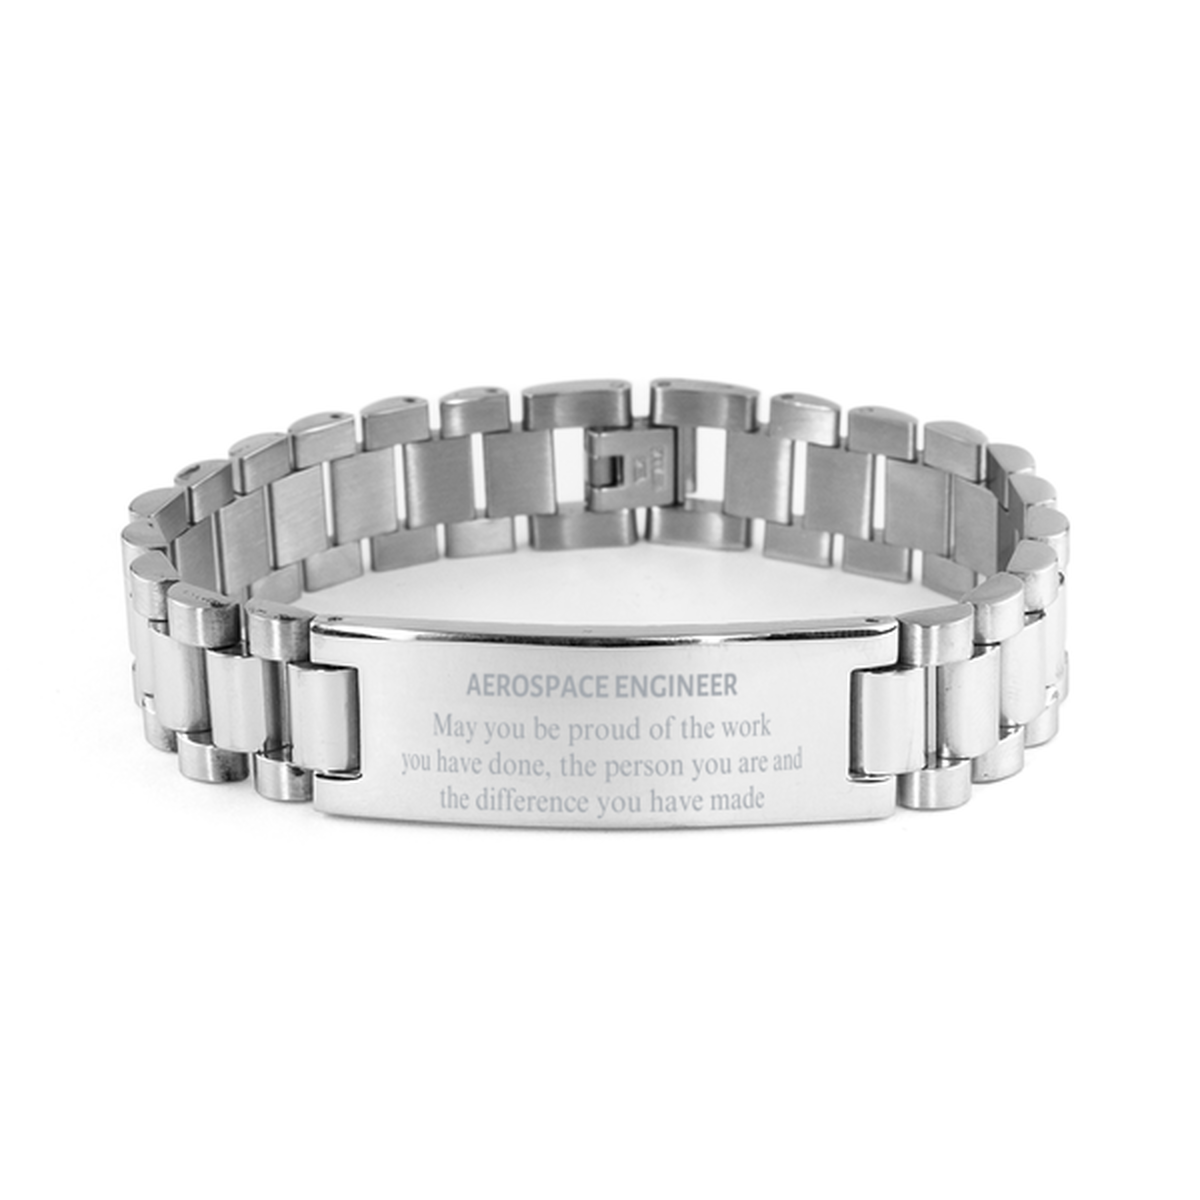 Aerospace Engineer May you be proud of the work you have done, Retirement Aerospace Engineer Ladder Stainless Steel Bracelet for Colleague Appreciation Gifts Amazing for Aerospace Engineer